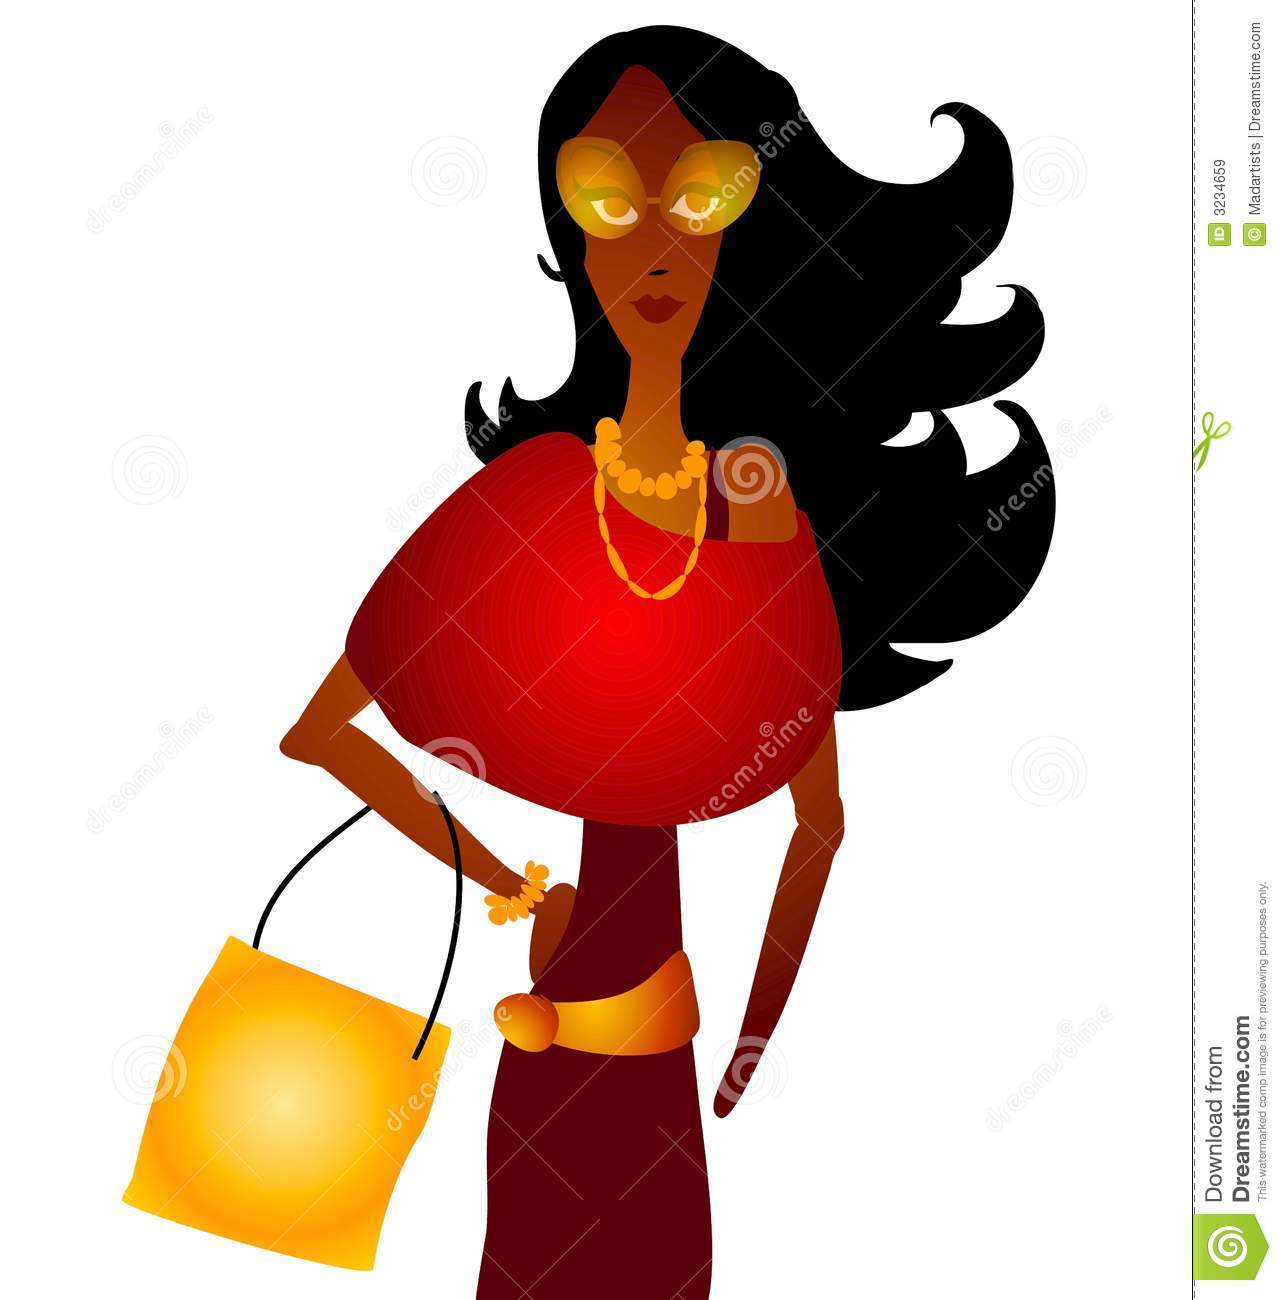 Fall Fashion Woman Shopping Royalty Free Stock Images   Image  3234659